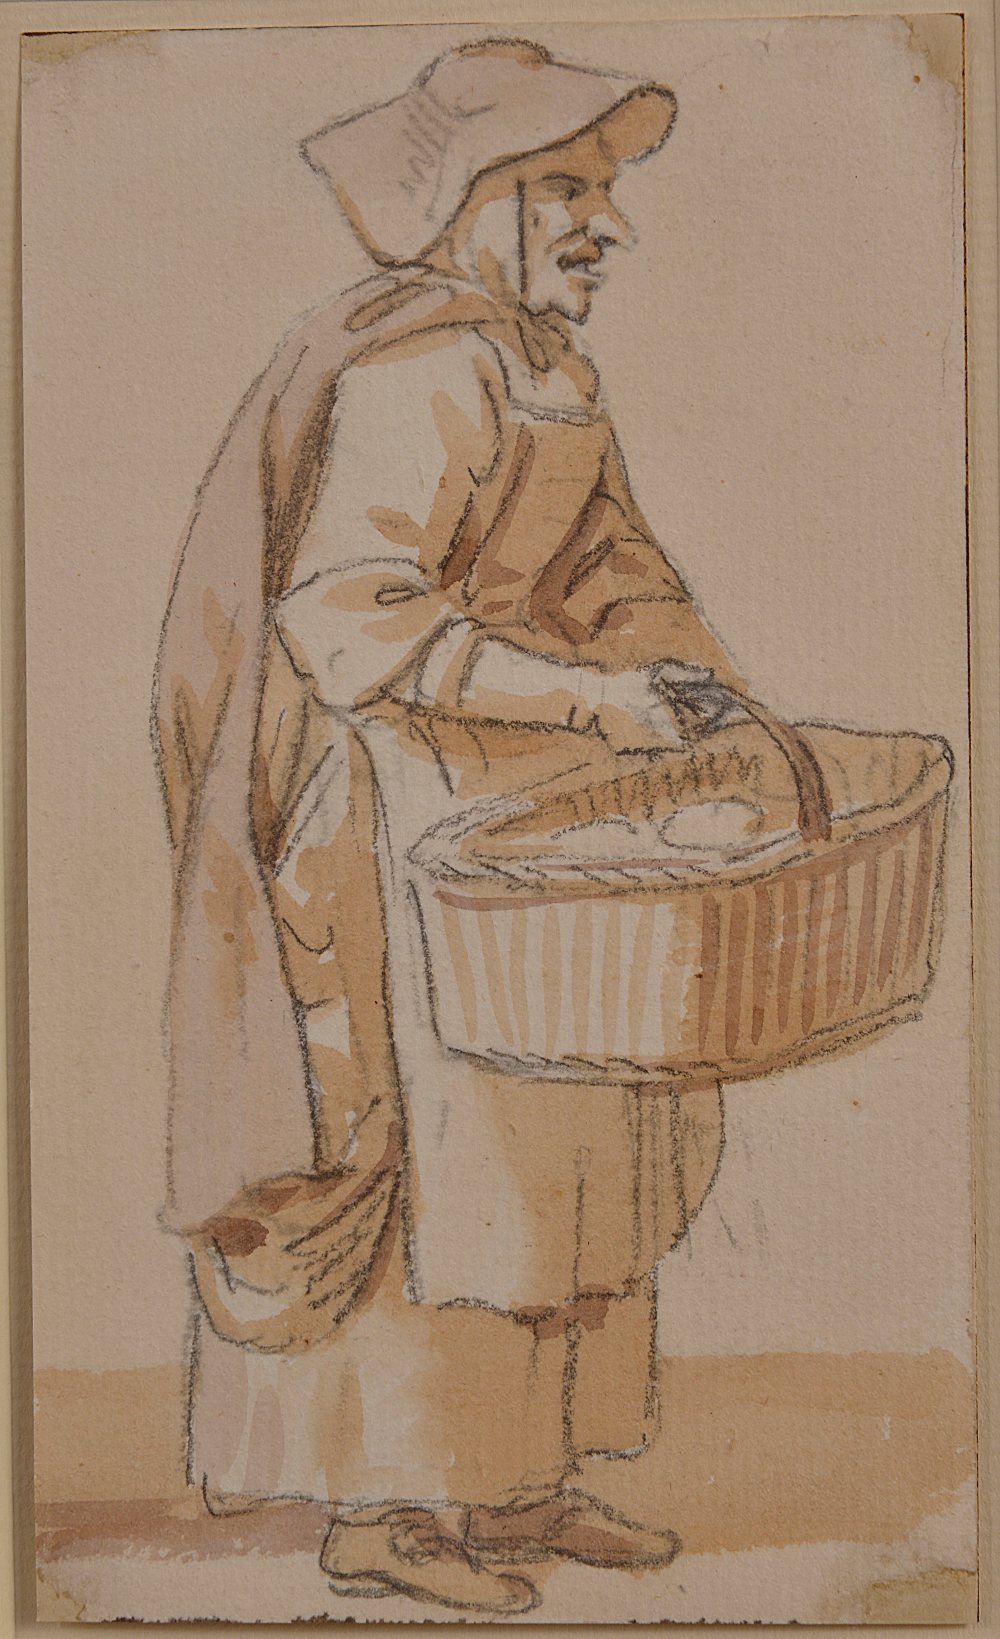 PAUL SANDBY R.A (1731-1809) STUDY OF A WOMAN CARRYING A BASKET brown washes over pencil on laid